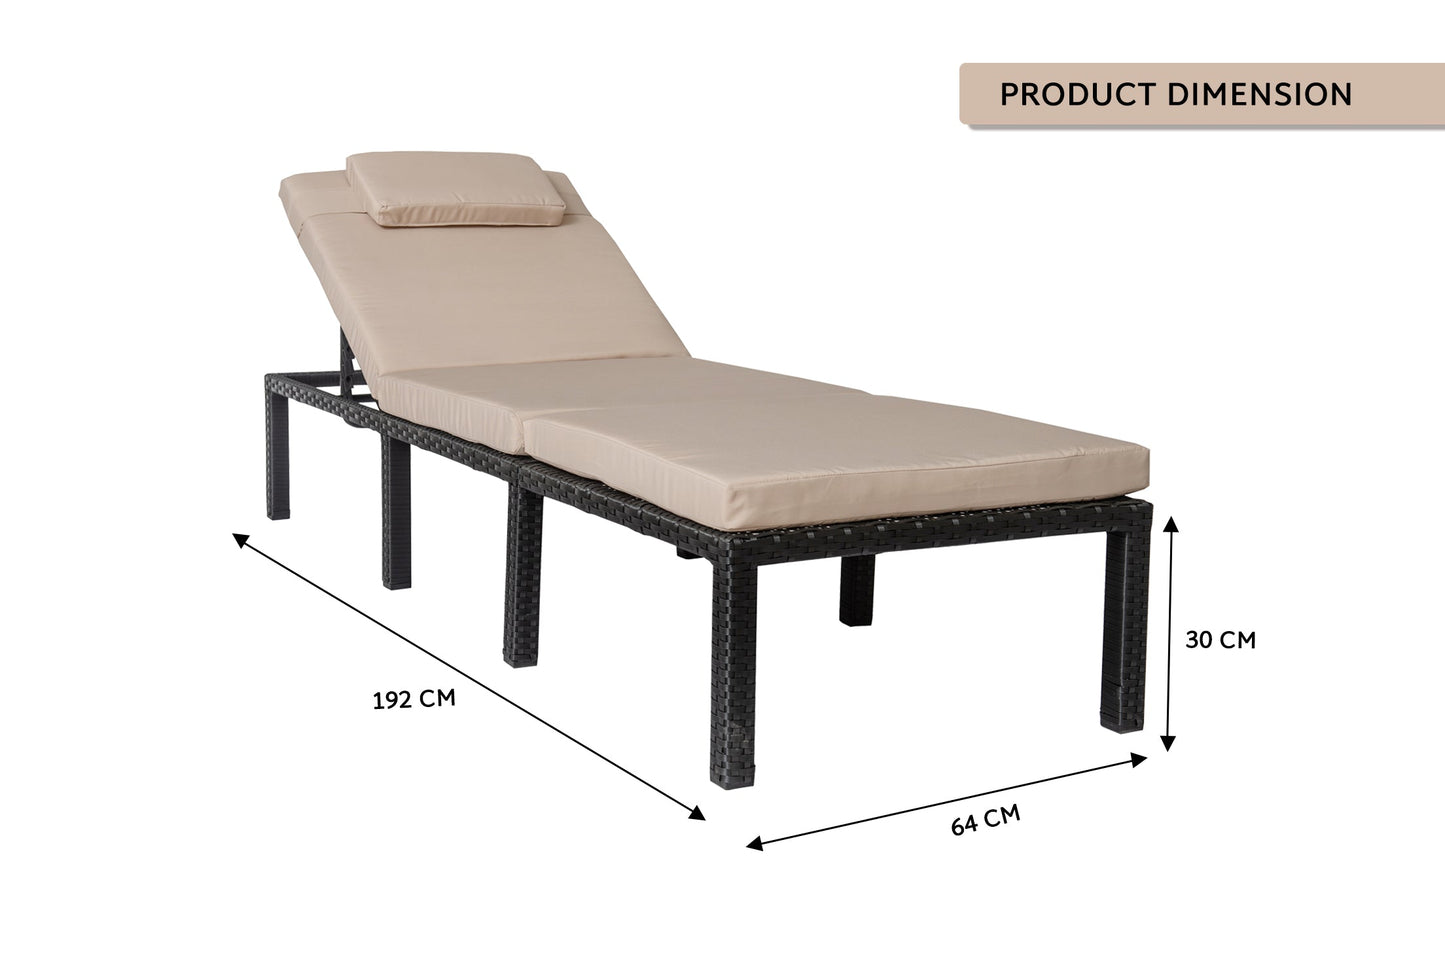 Straame Rattan Outdoors Sunlounger, Reclining and Adjustable Sun Bed Alicante